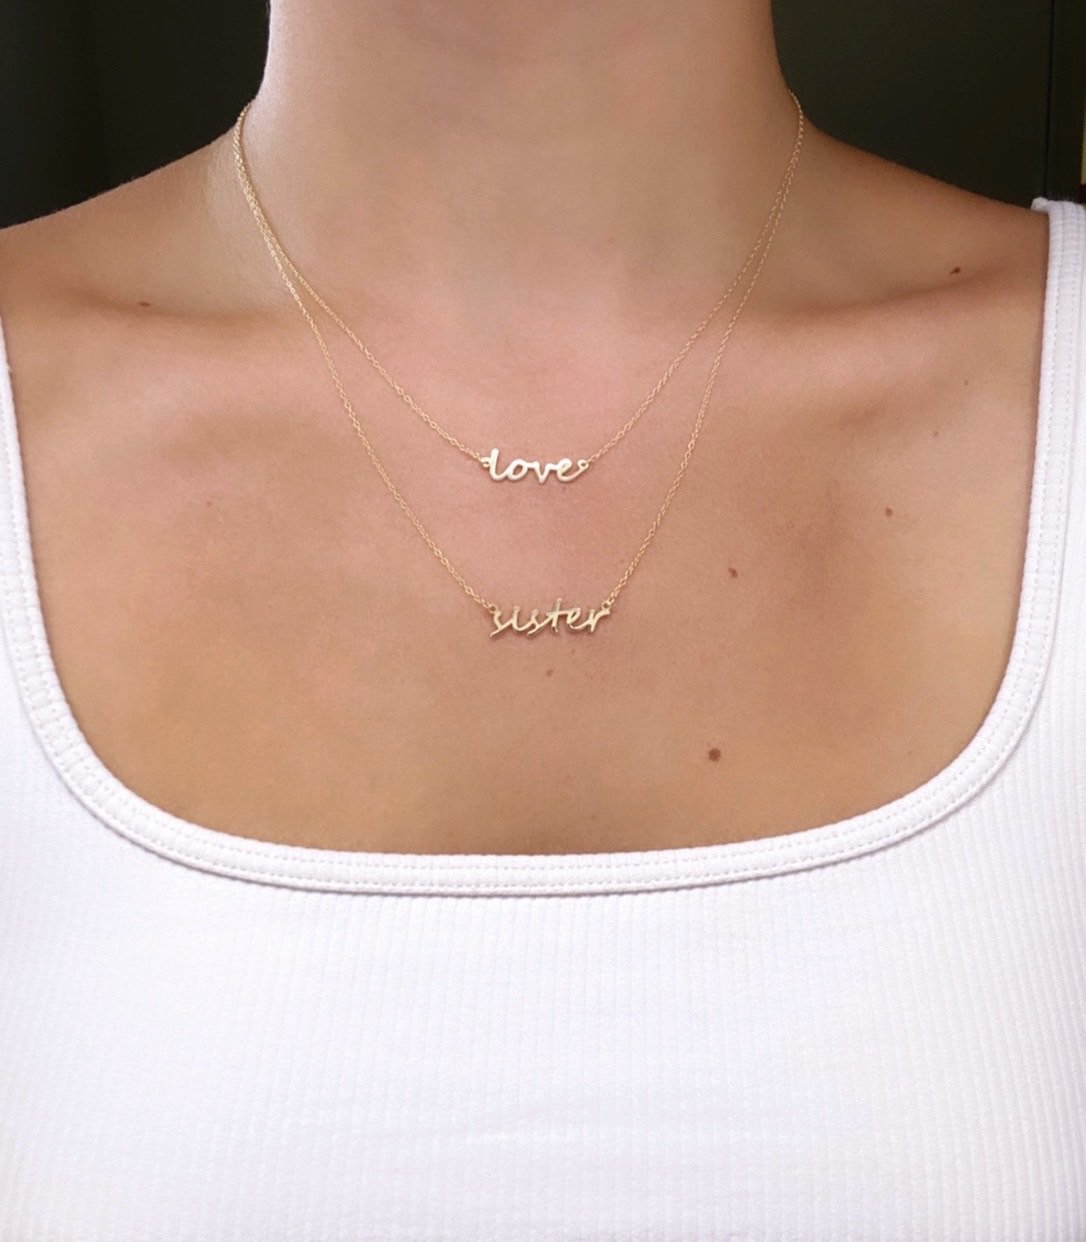 Love Dainty Necklace necklace The Sis Kiss